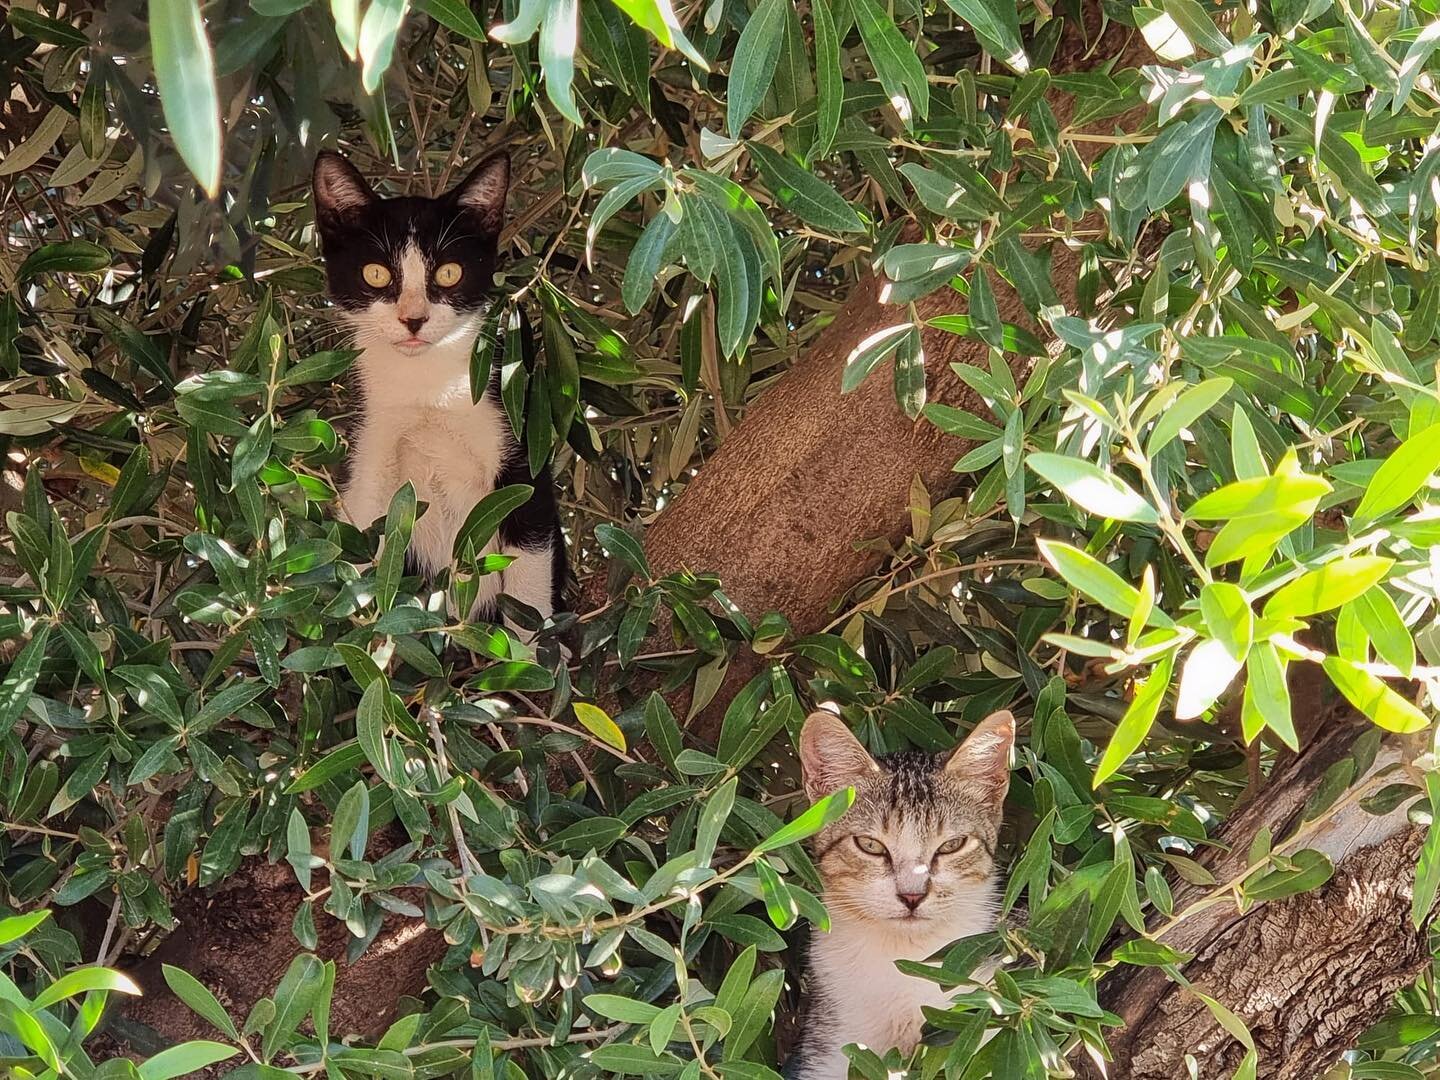 These little tree kittens need a foster home! 🌳🐈 they are living in Vinaros, in an area with lots of car traffic. Please get in touch to foster! 

Buscamos casas de acogidas para estas peque&ntilde;os gatitos del &aacute;rbol! 🌳🐈 est&aacute;n viv